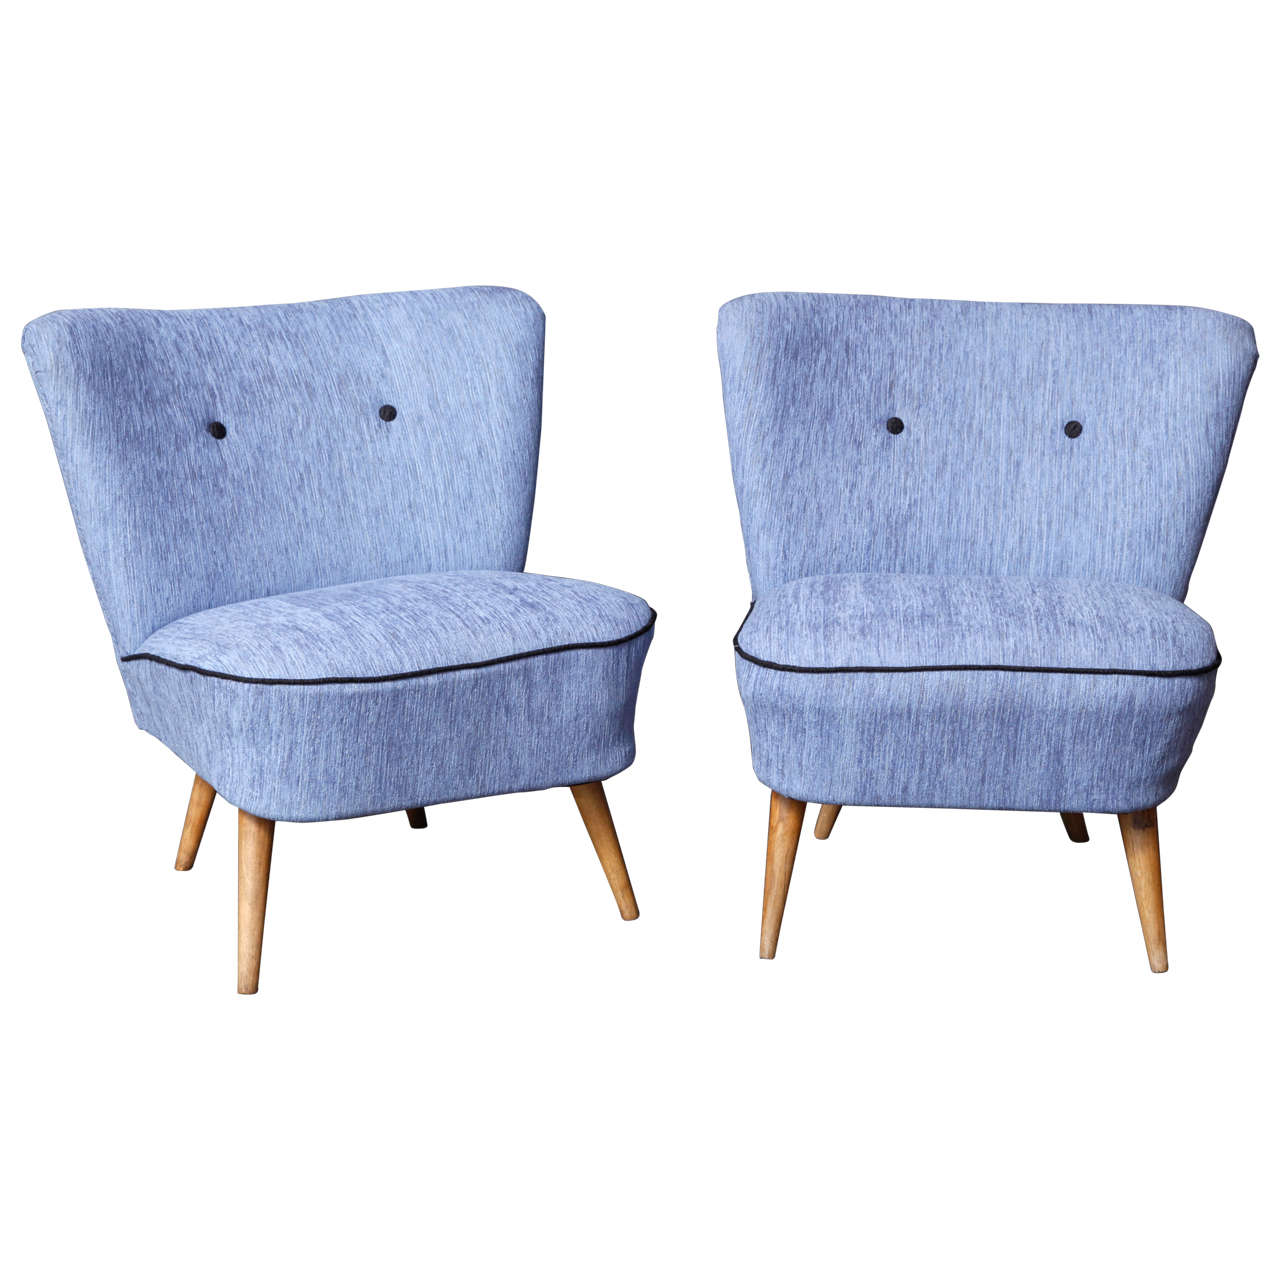 Pair of easy chairs from 1950